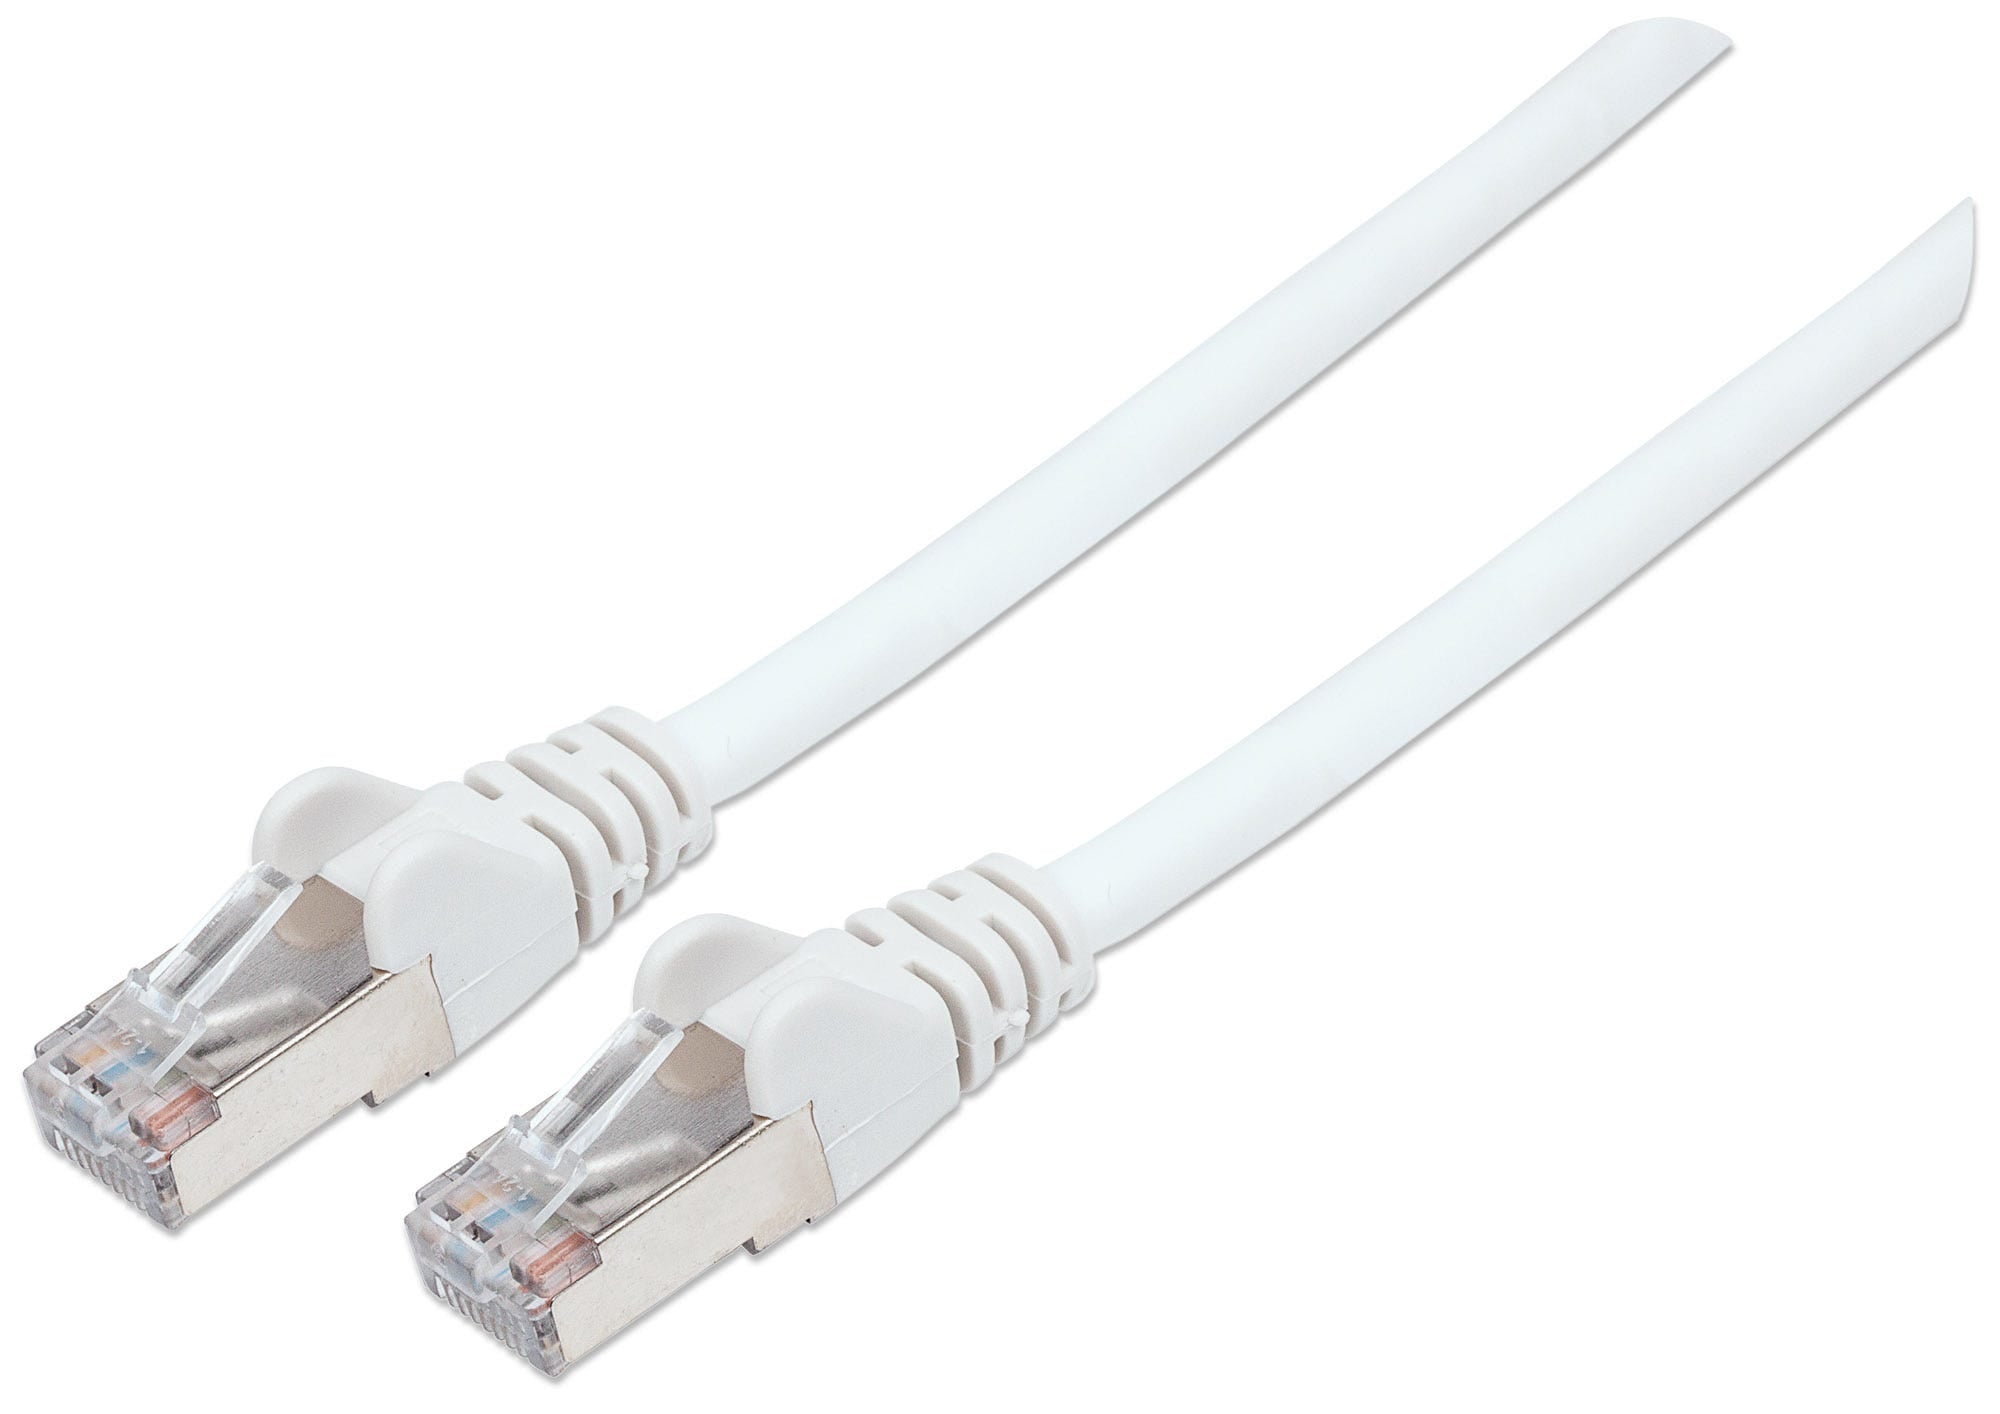 Intellinet Network Patch Cable, Cat6, 5m, White, Copper, S/FTP, LSOH / LSZH, PVC, RJ45, Gold Plated Contacts, Snagless, Booted, Lifetime Warranty, Polybag